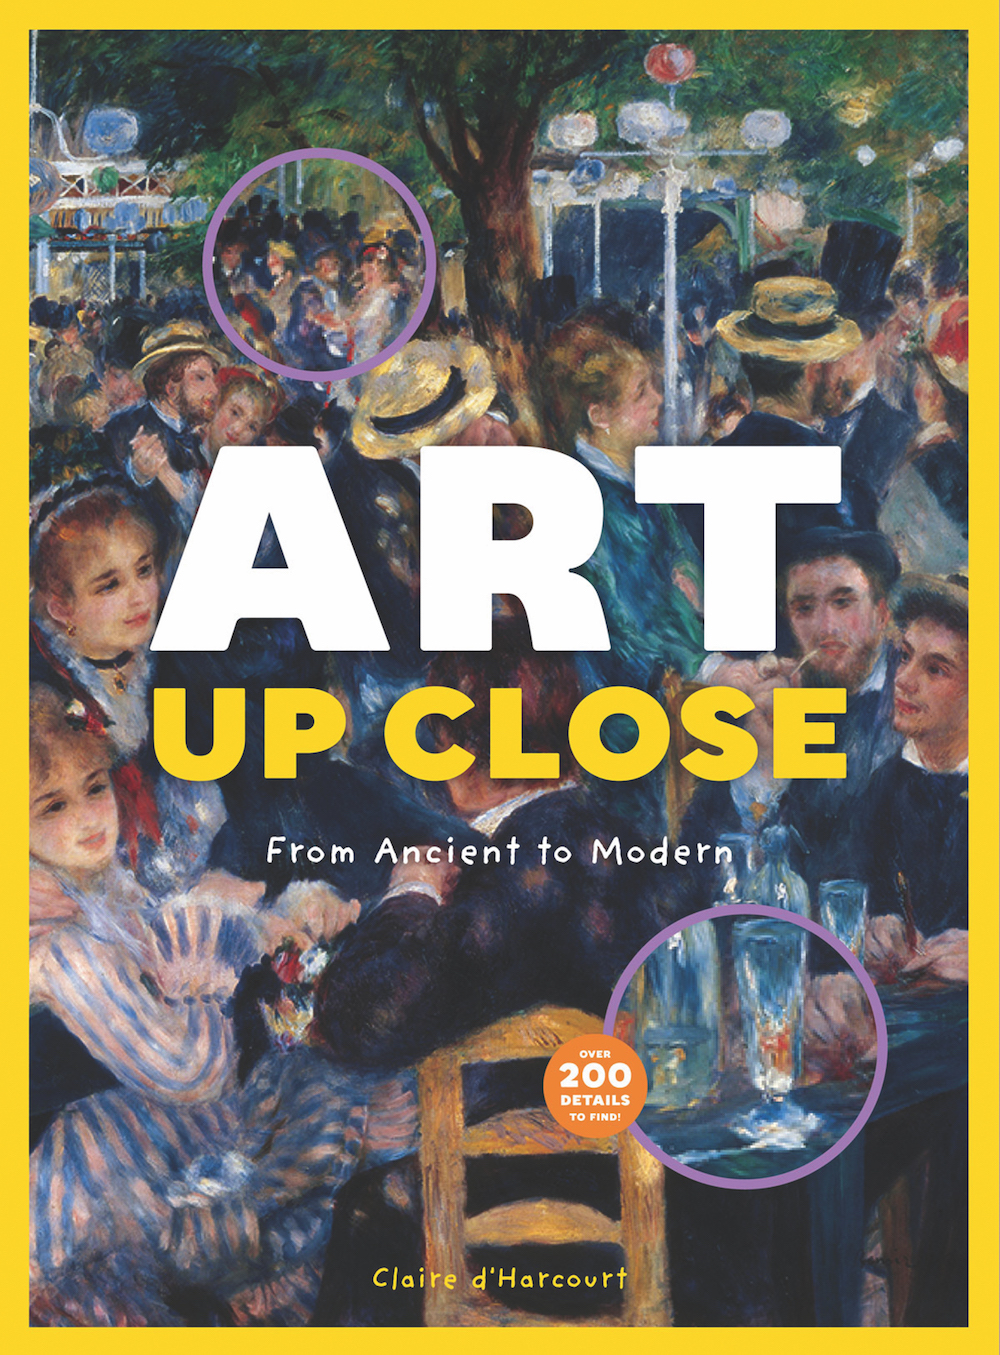 Gorgeous look-and-find books for kids: Art Up Close by Claire d'Harcourt